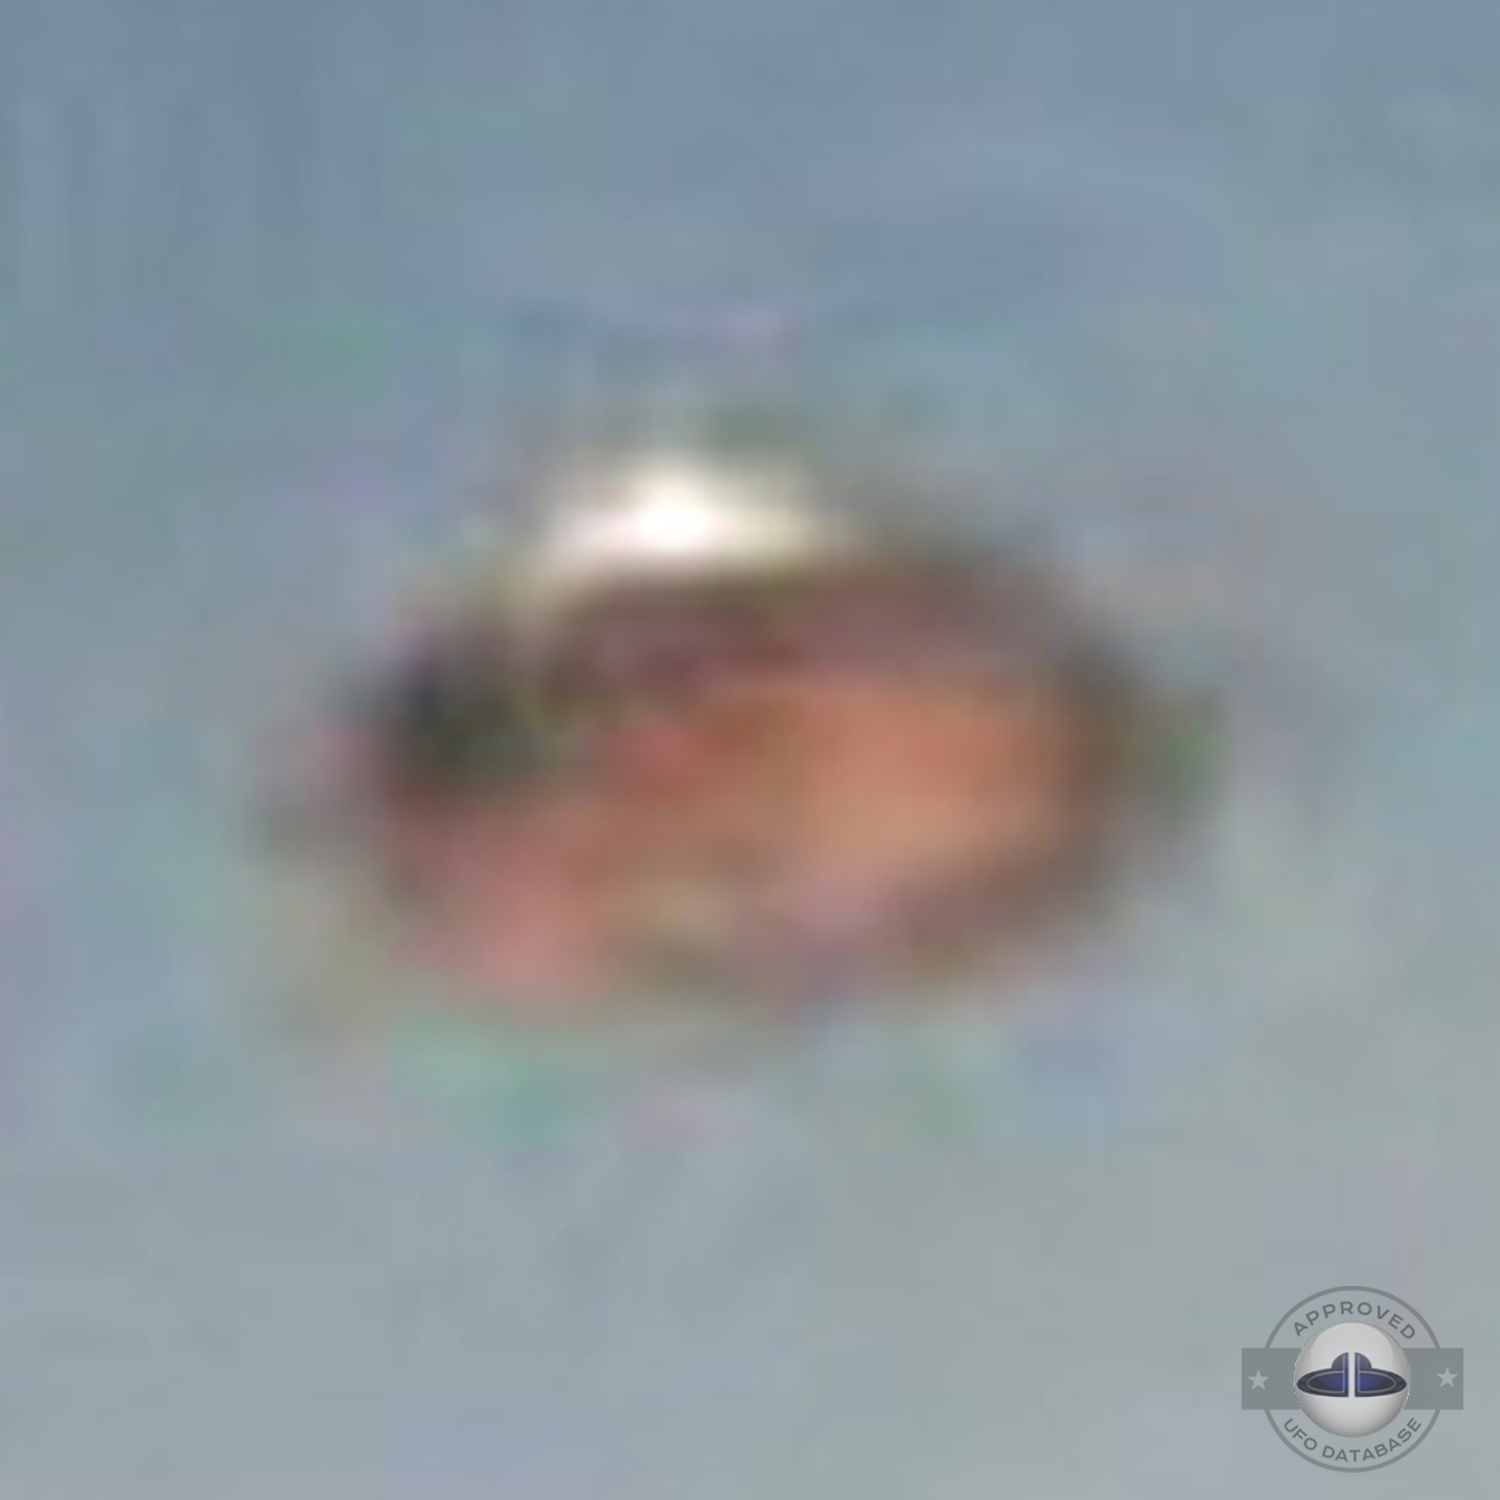 UFO Picture caught in bright day light over desertic mountains UFO Picture #30-4